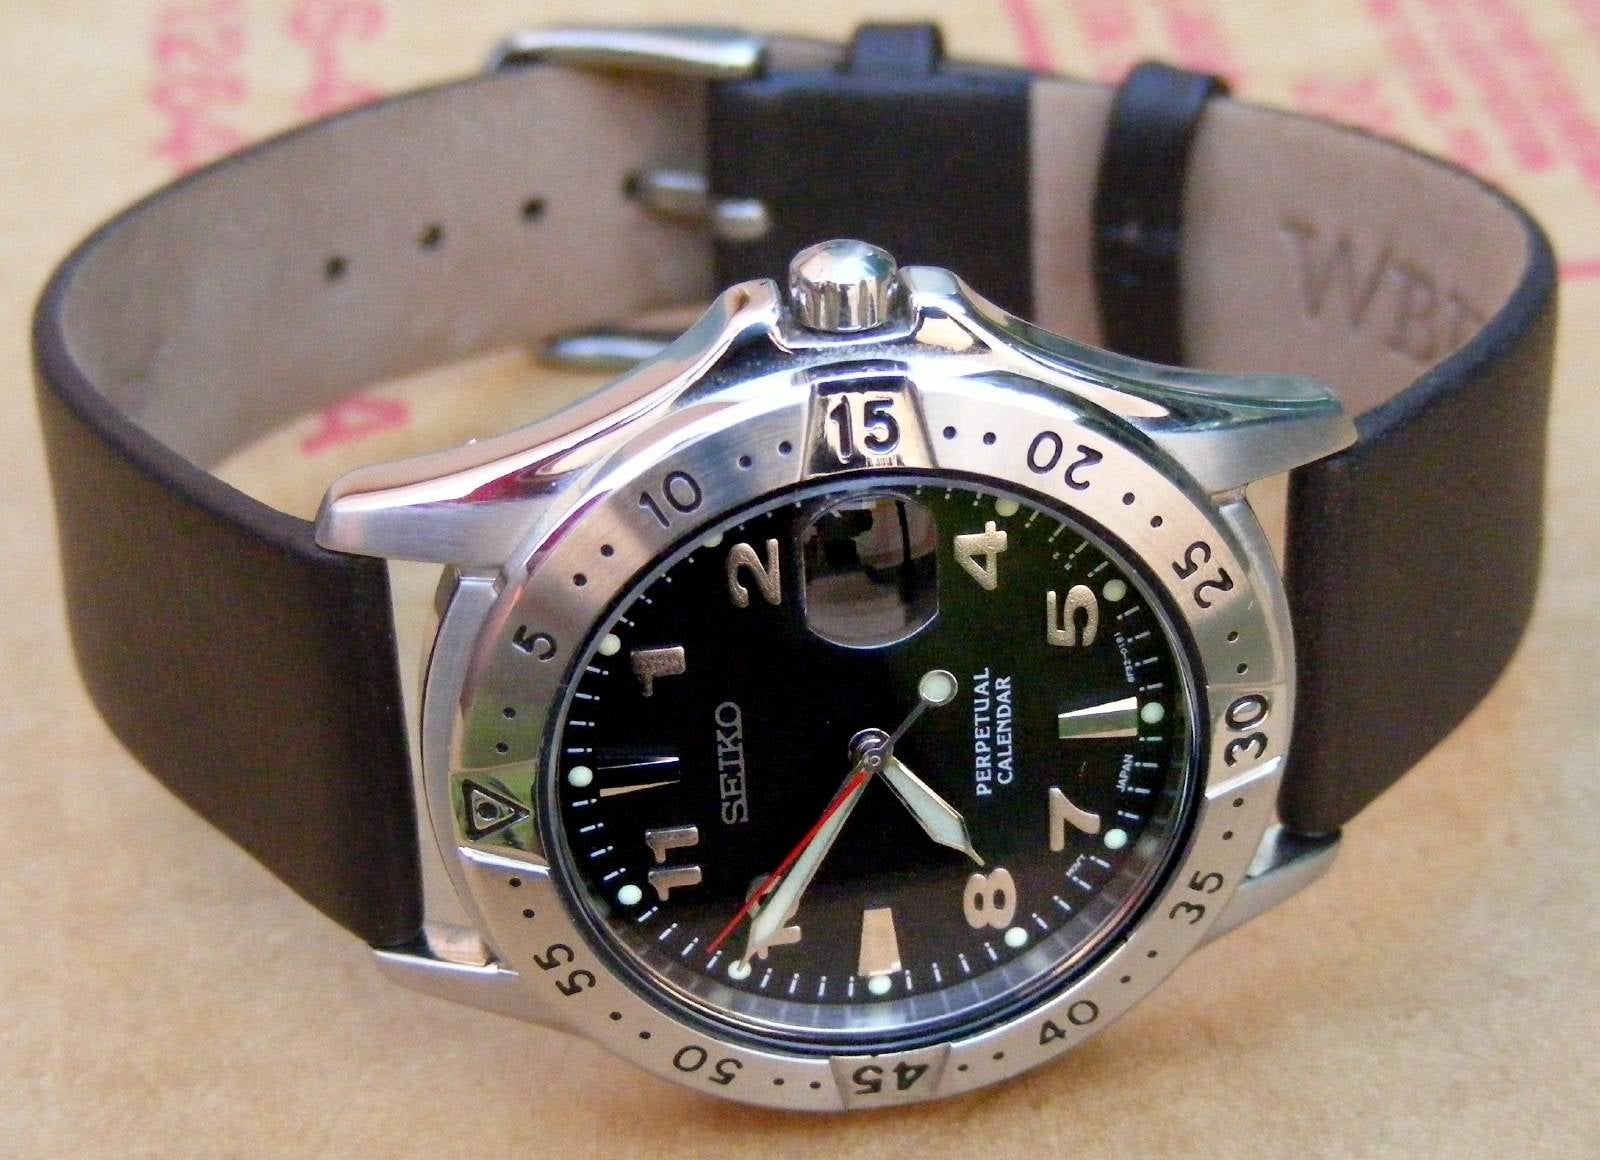 Seiko diver case to fit 8f32 movement? | WatchUSeek Watch Forums